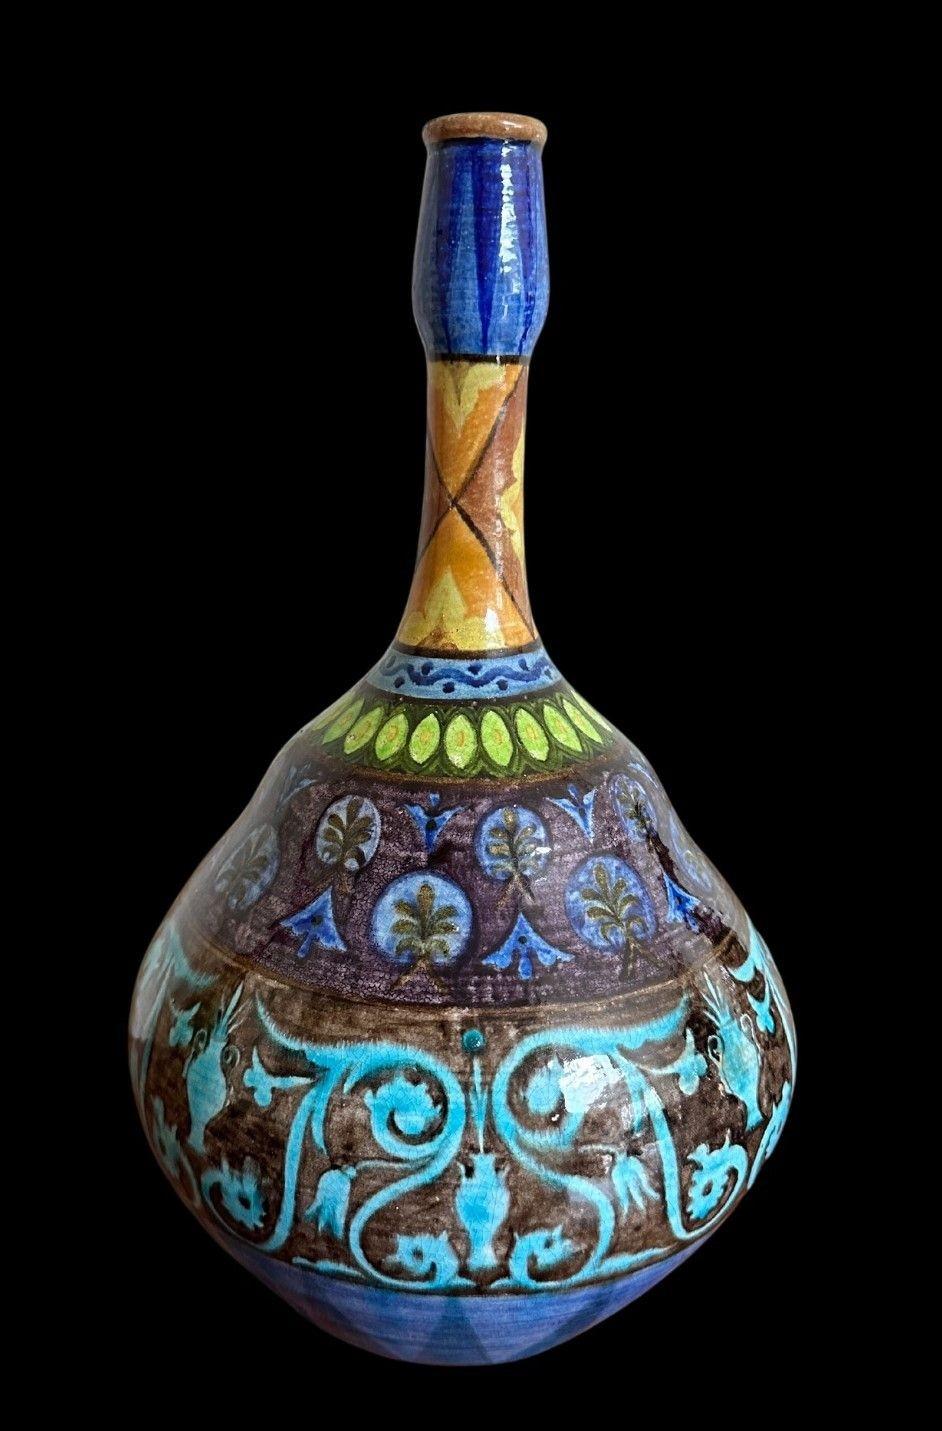 5380
Unusual William De Morgan Globe and Shaft Vase with a scarce Colourway decorated with Persian Motifs
Invisible restoration to the neck
31cm high, 18cm wide
Tulip mark for 1888 - 87.